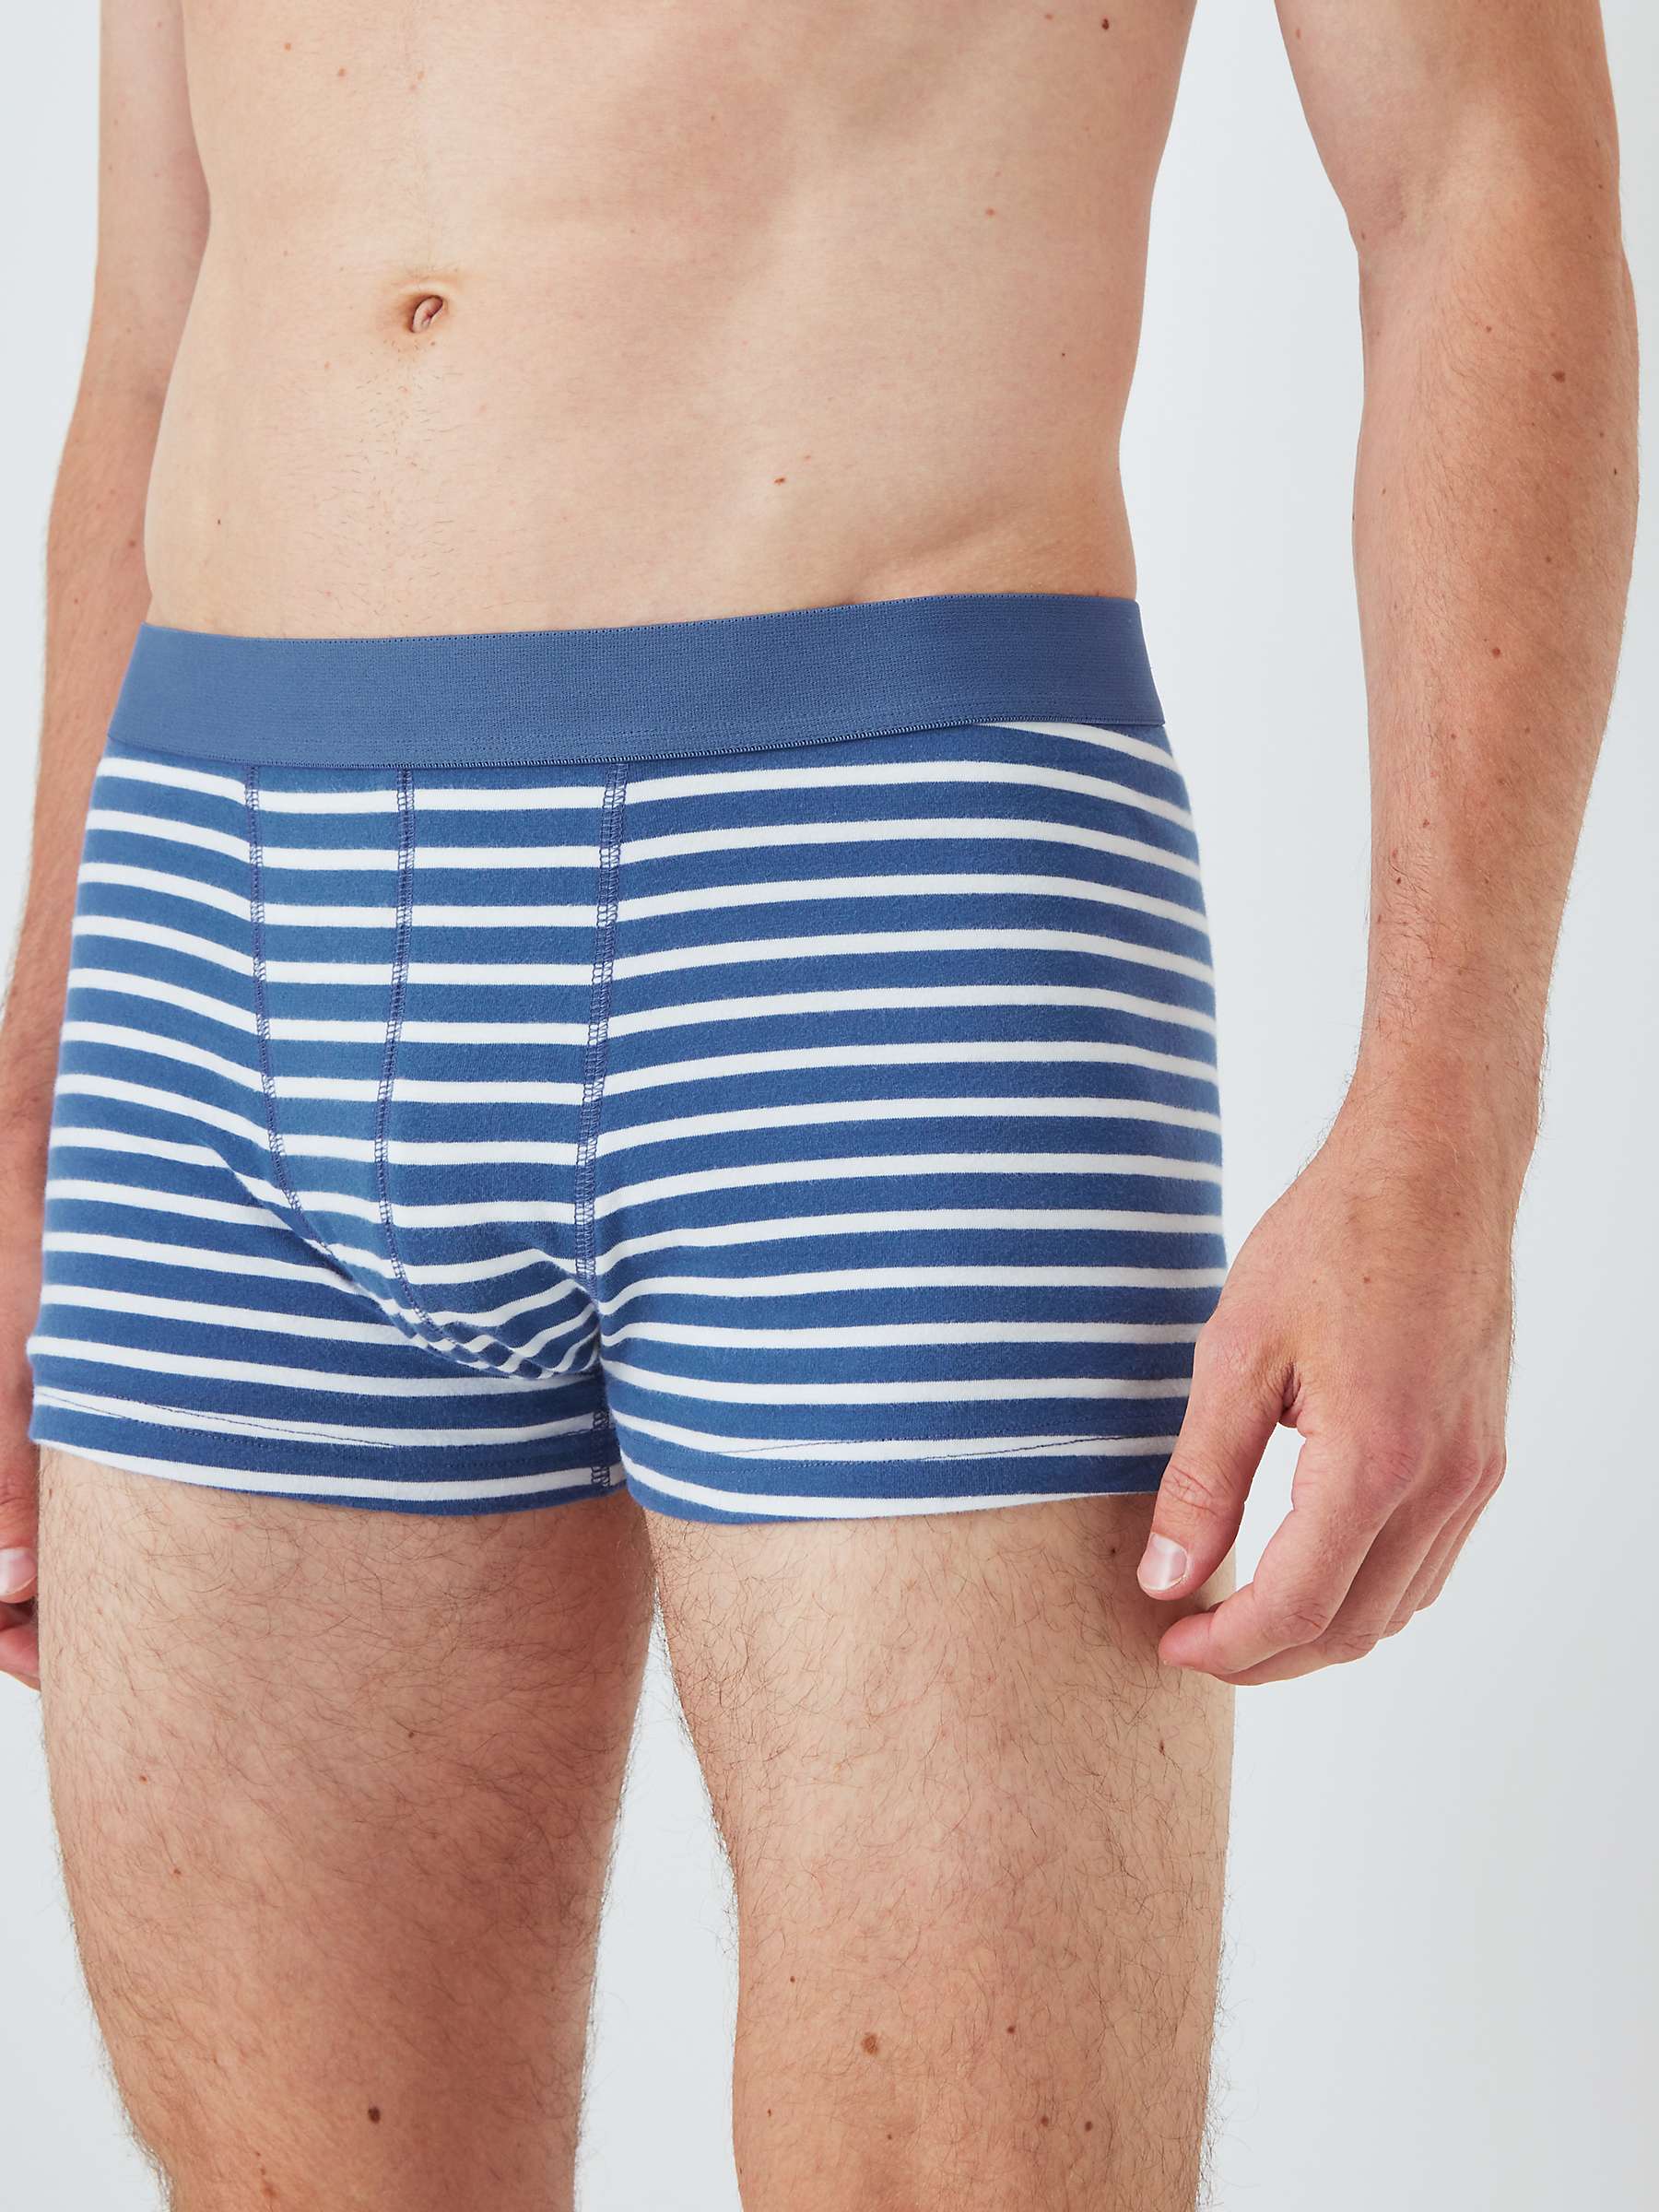 John Lewis ANYDAY Stretch Cotton Stripe Plain Trunks, Pack of 3, Blue ...